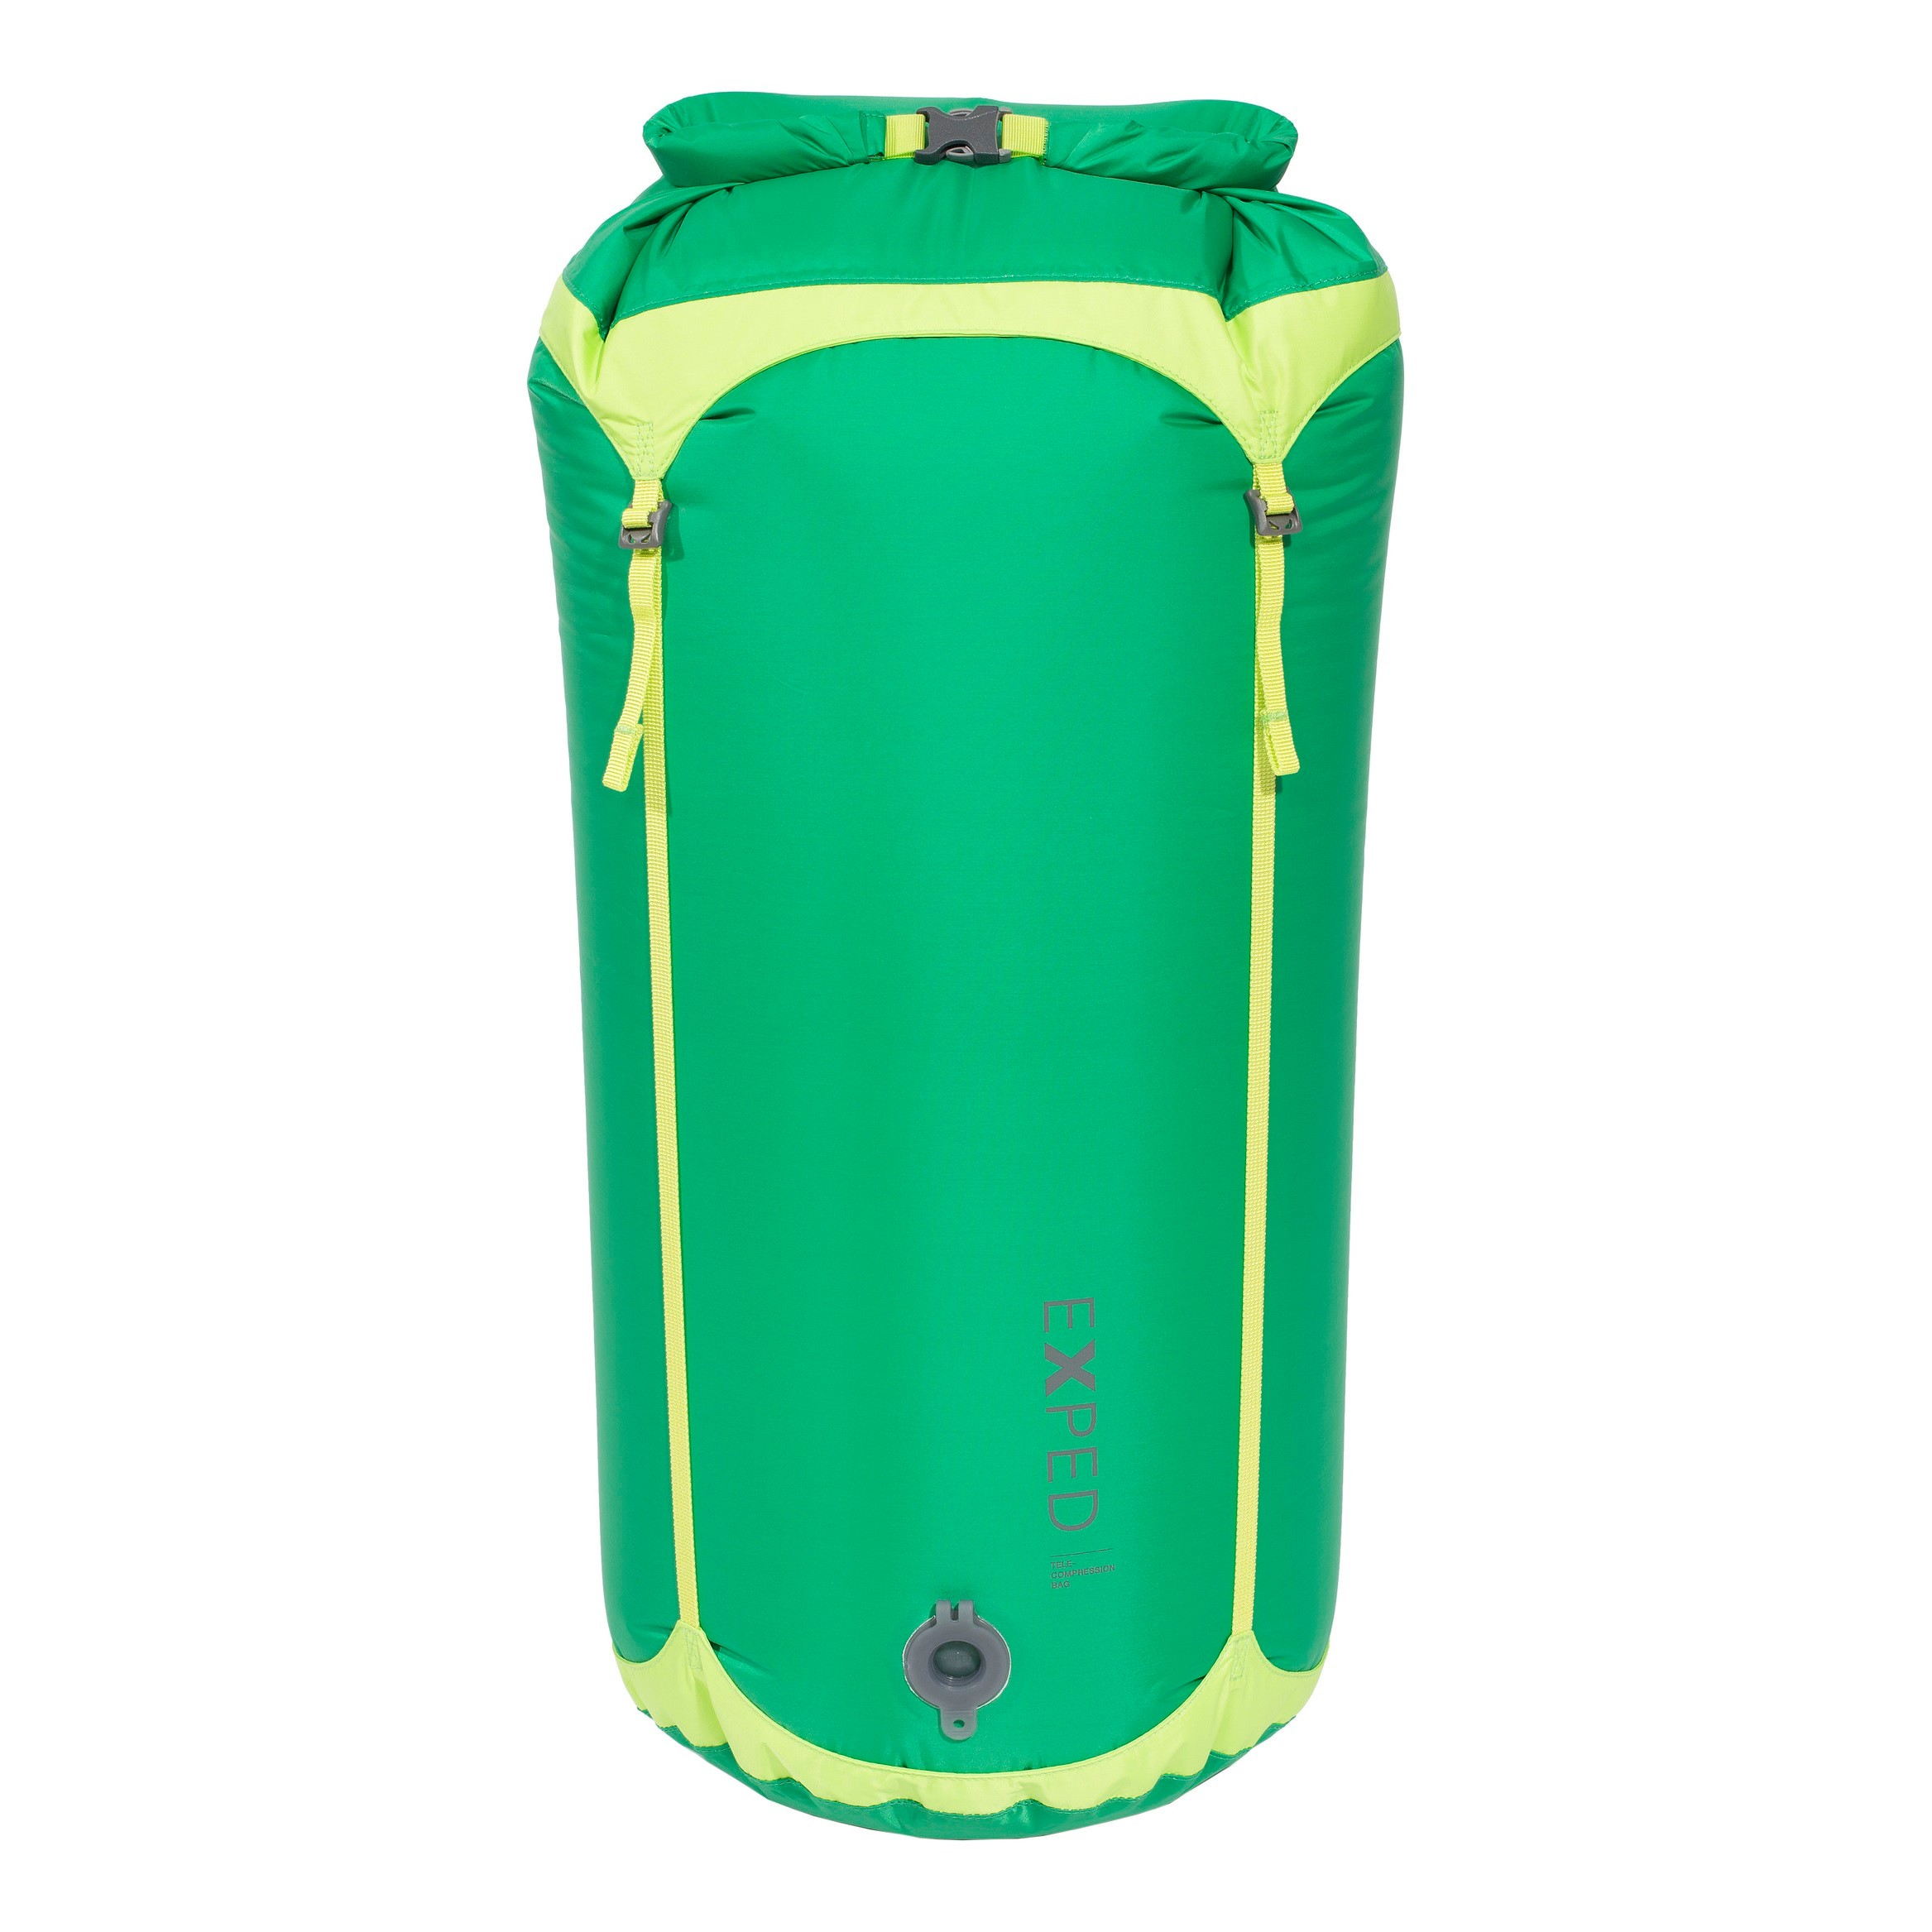 Exped Waterproof Telecompression Bag L Green